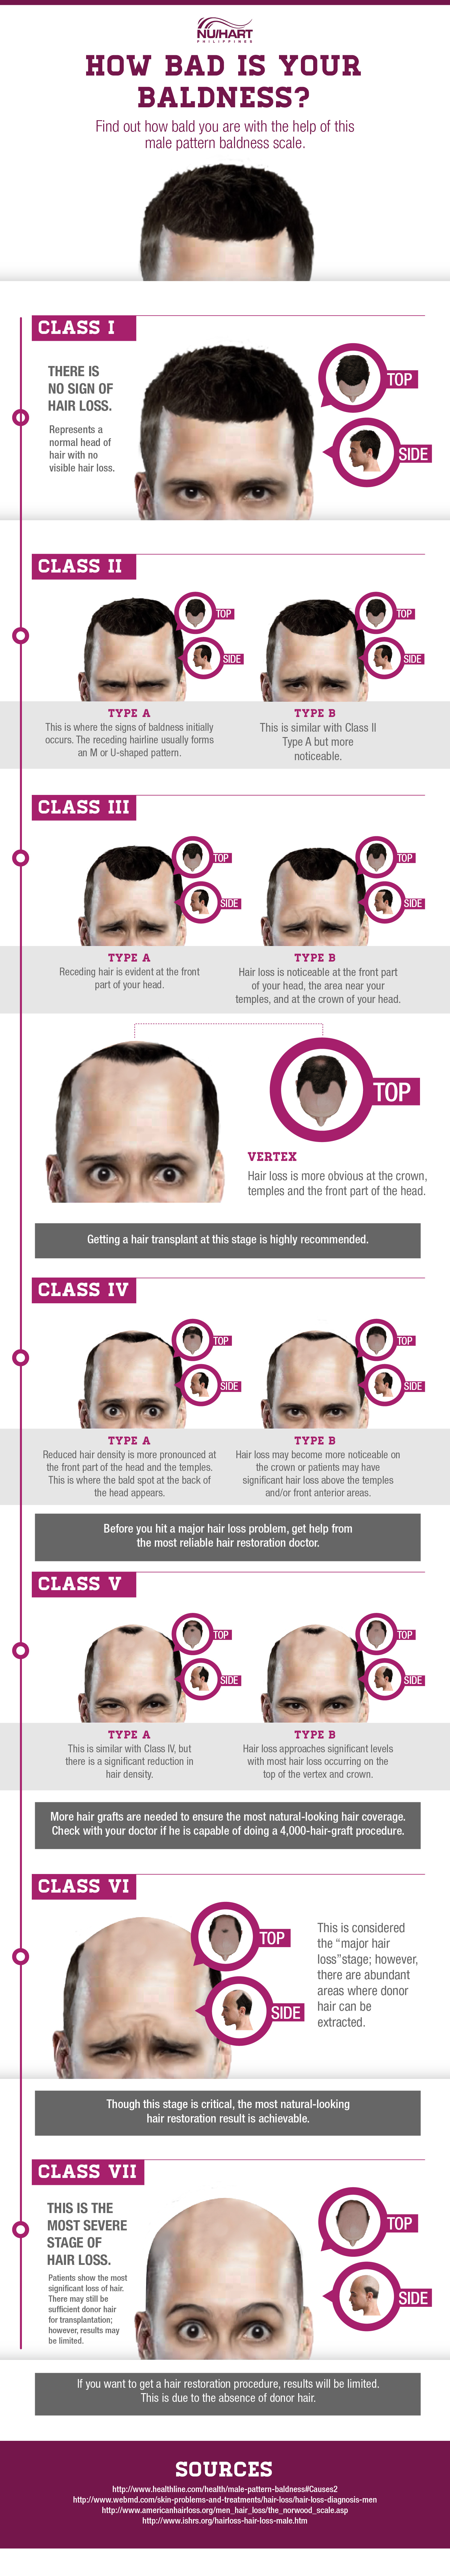 Male Baldness Scale: How Bad is Your Bald?